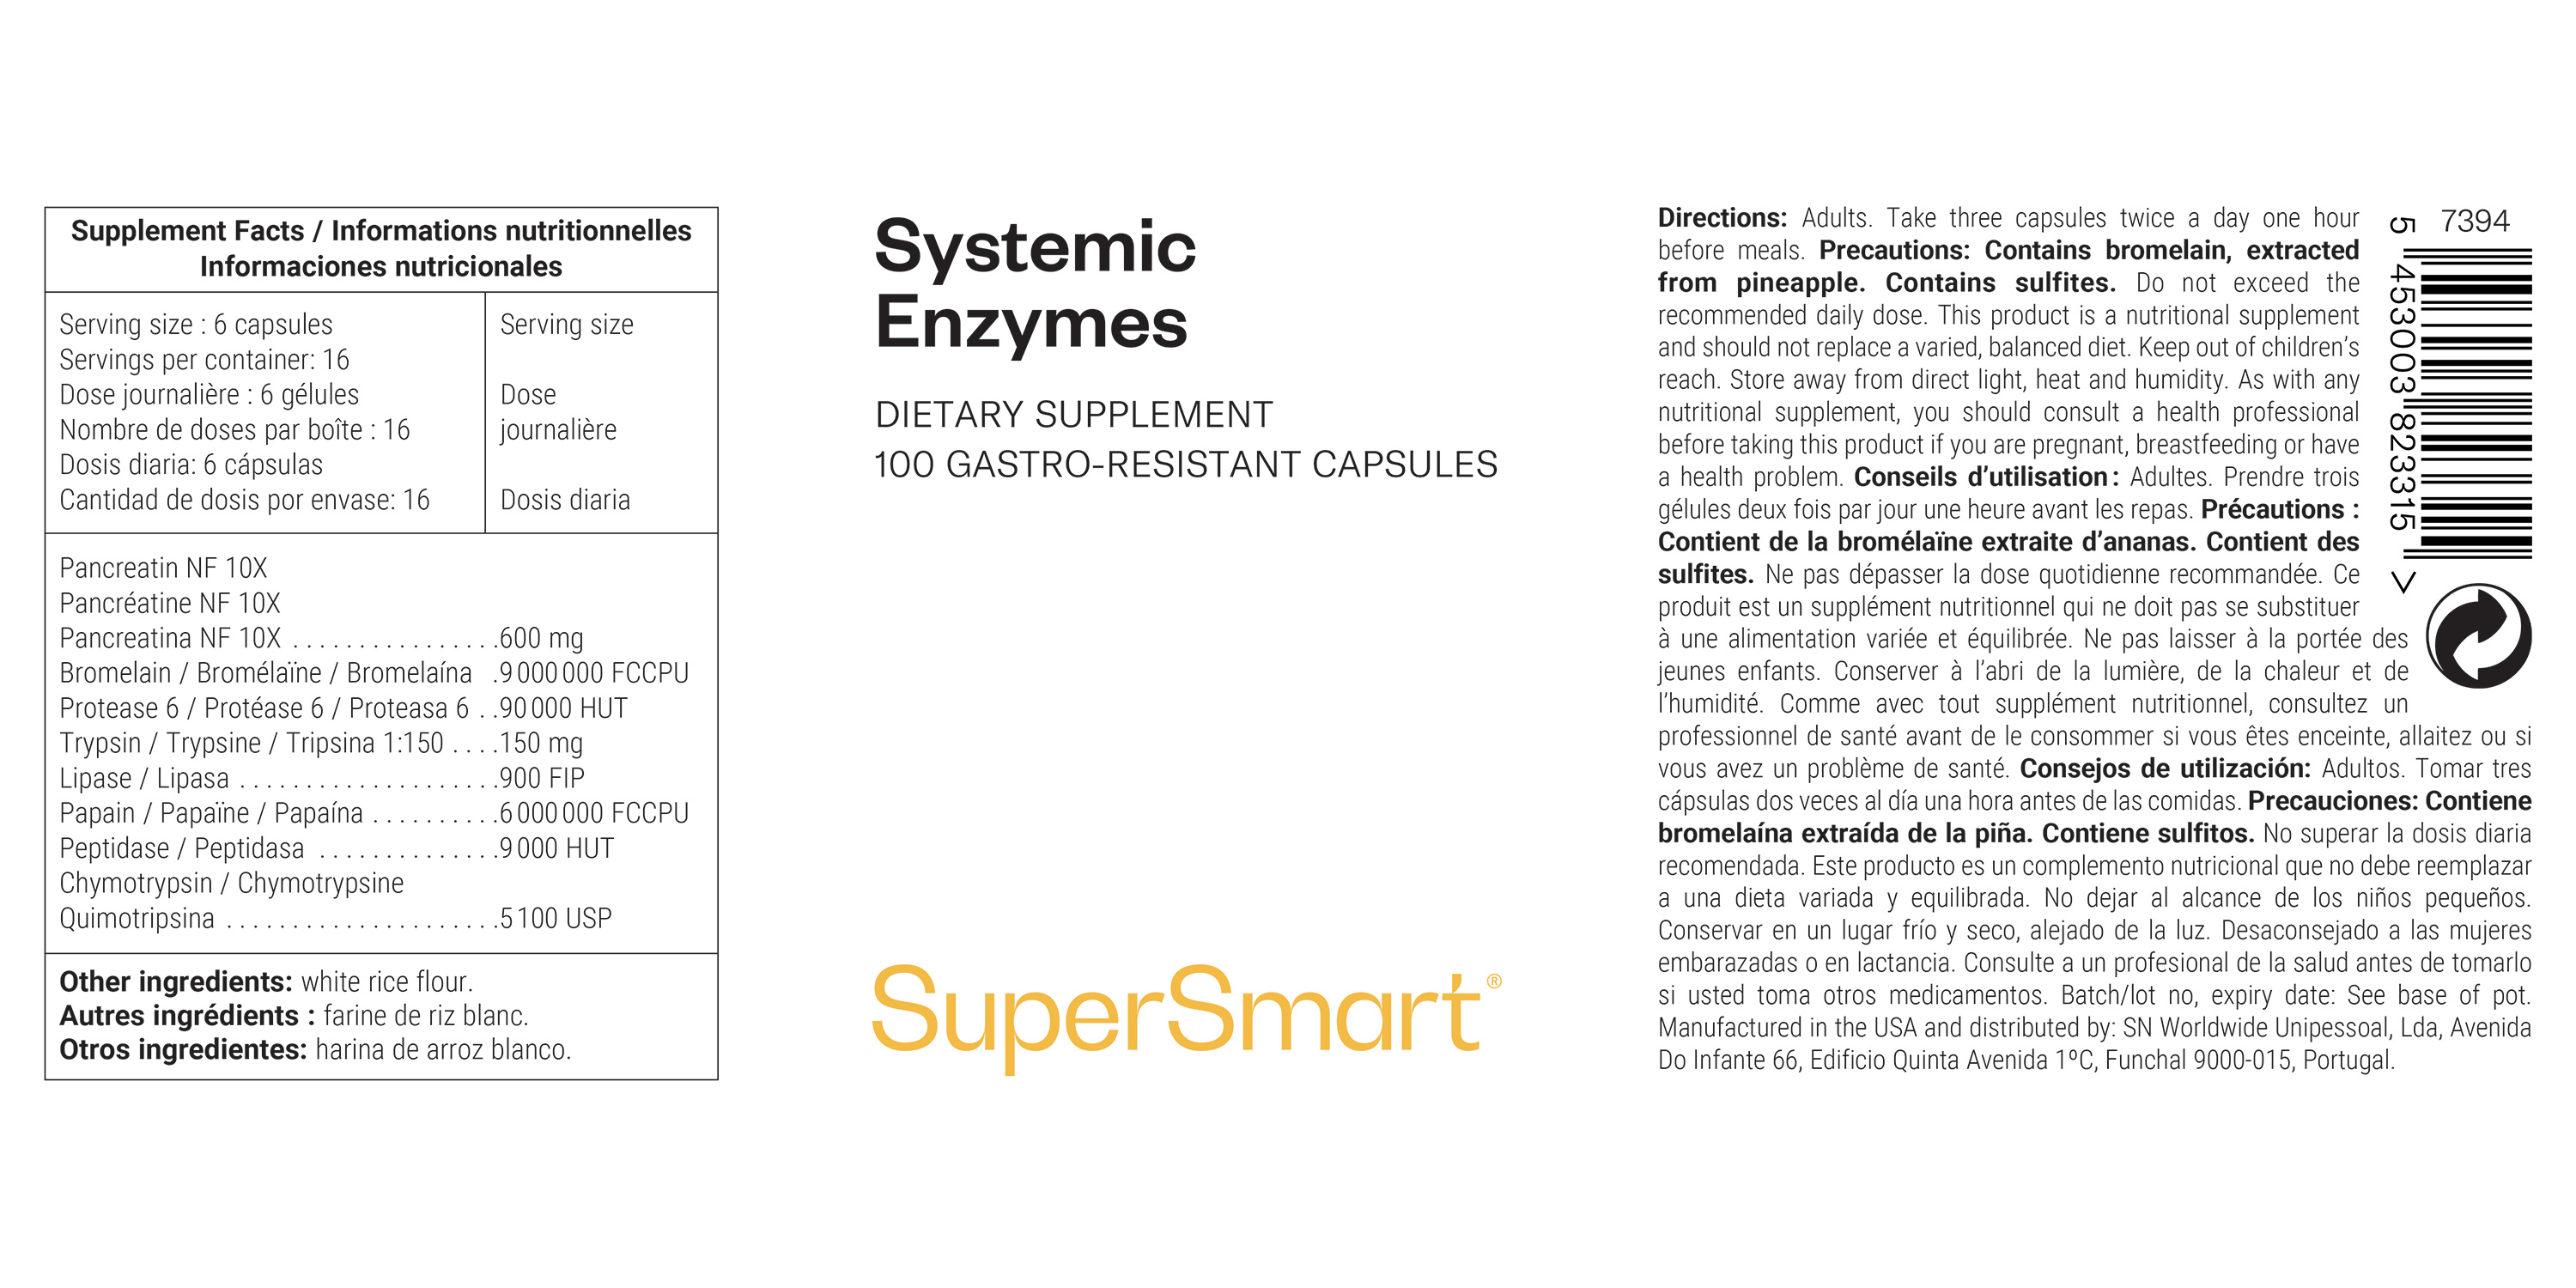 Systemic Enzymes dietary supplement